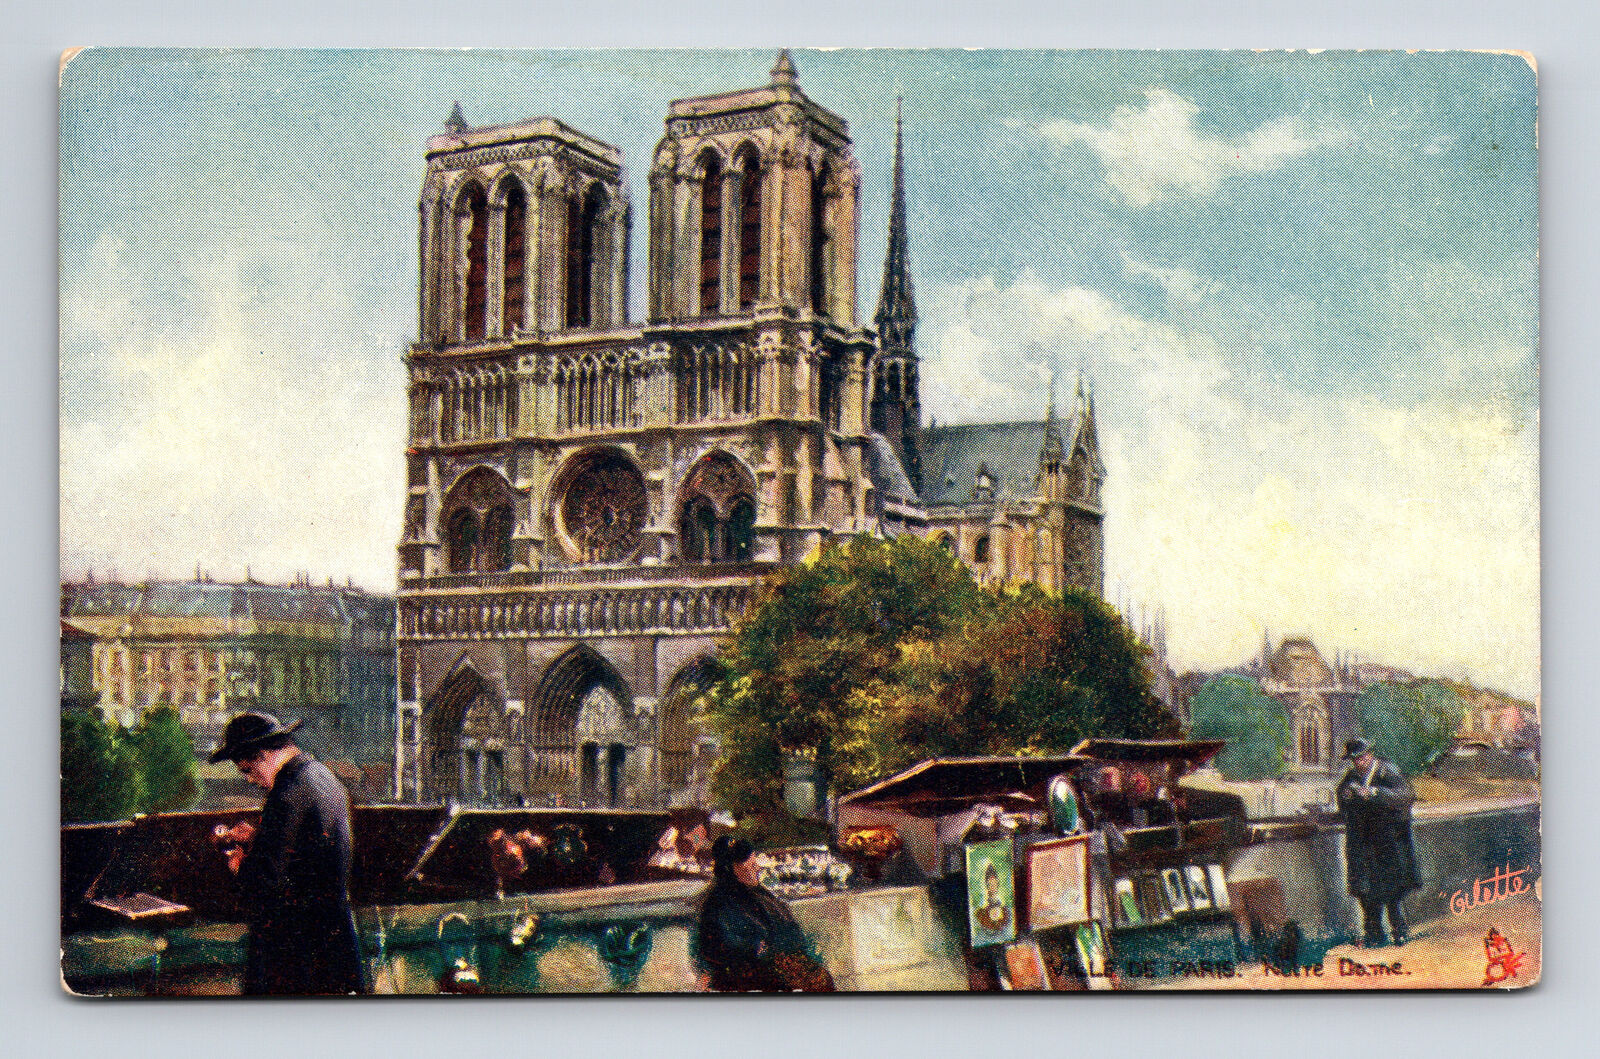 Cathedral of Notre Dame Cathedral Paris France Raphael Tuck's Oilette Postcard